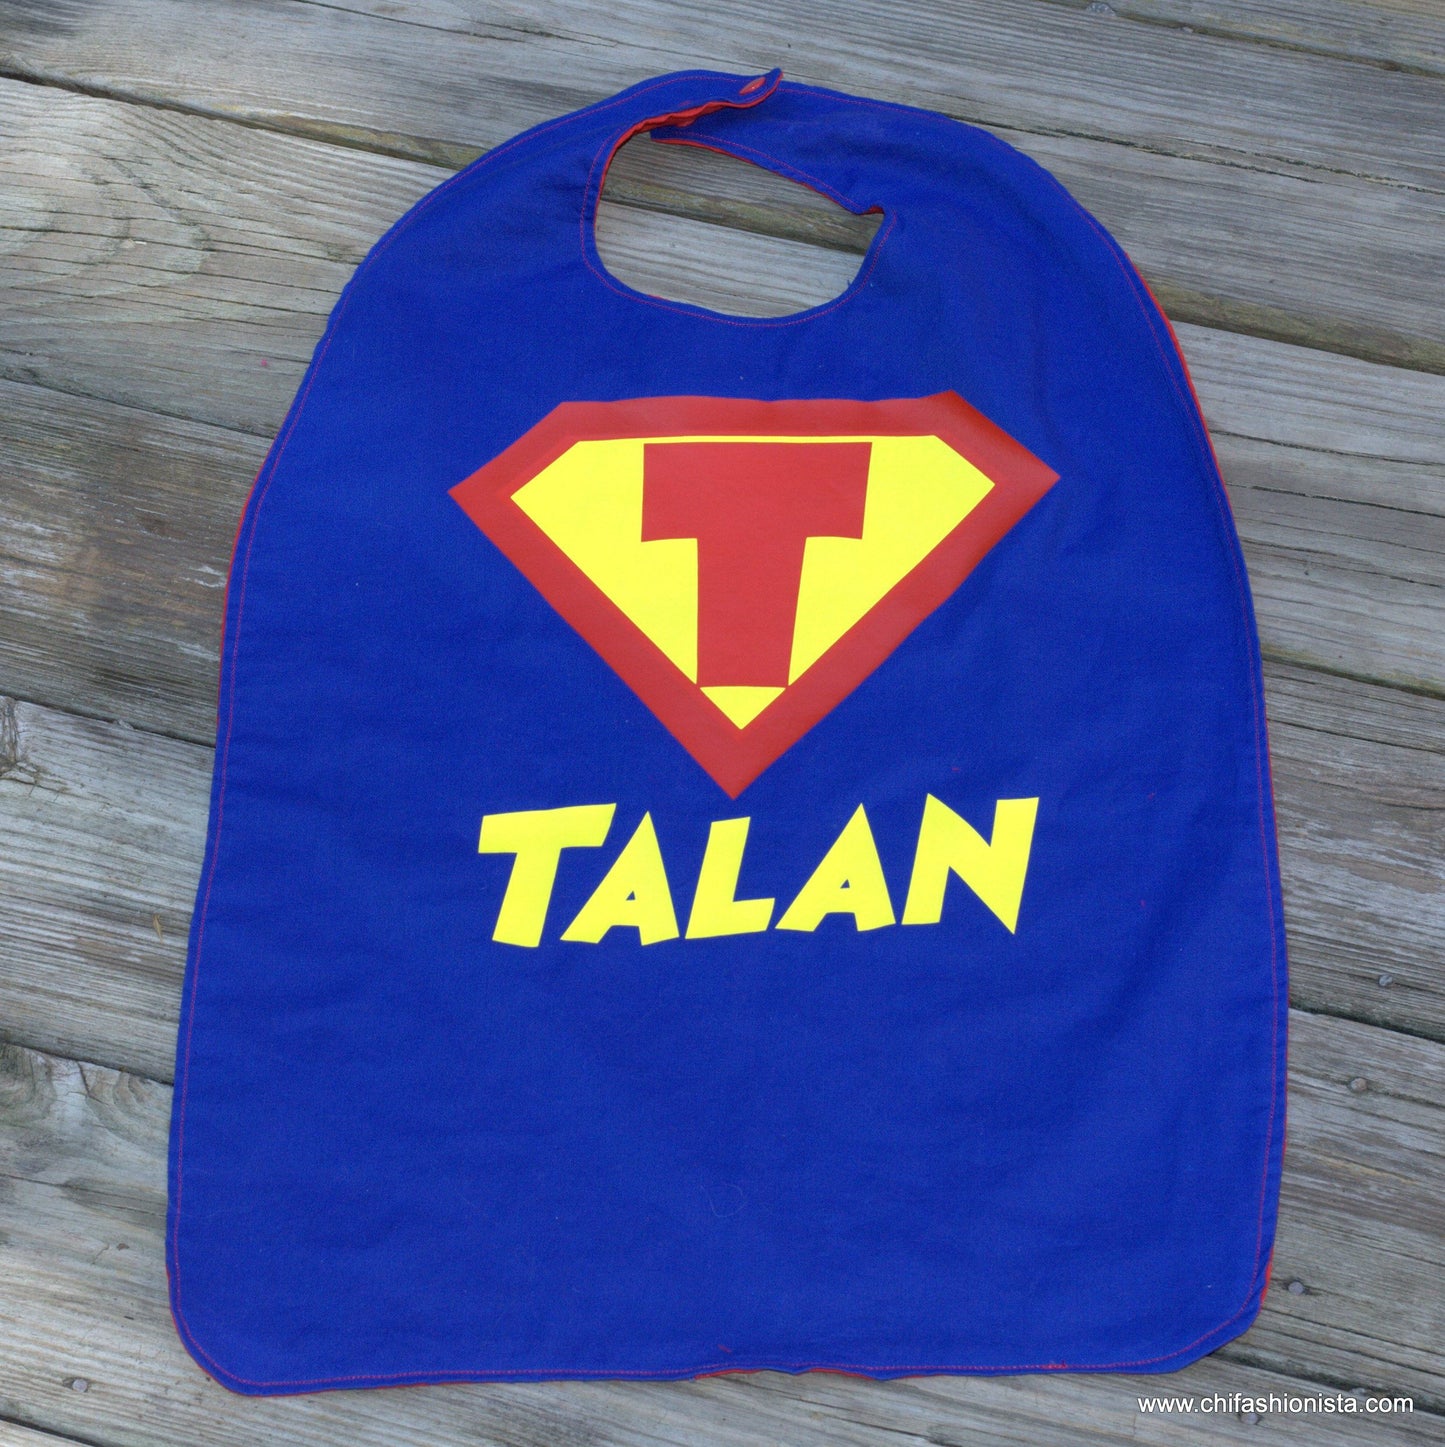 Handcrafted Children's Clothing, Clothing for Children and Parents, Personalized Super Hero Cape, chi-fashionista